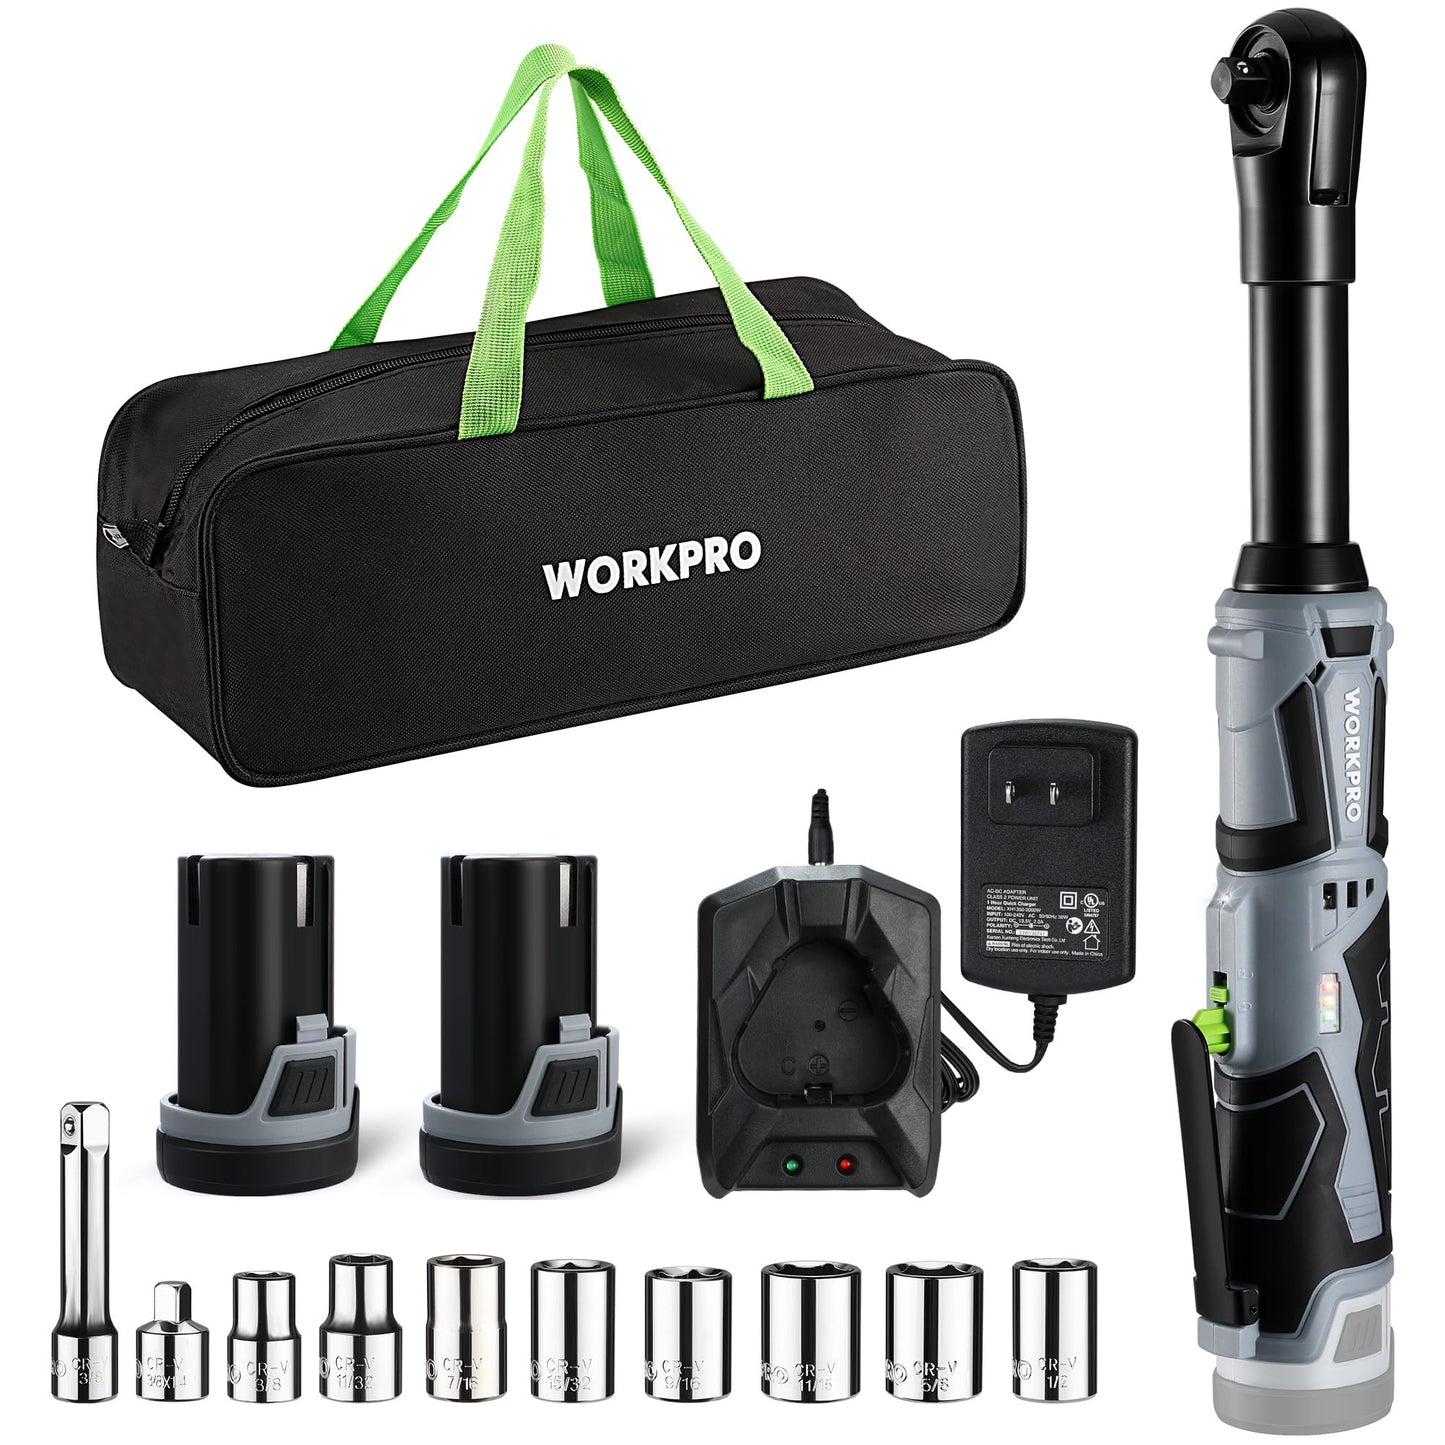 WORKPRO 12V 40 Ft-lbs Power Ratchet Wrench Kit with 10-Piece Socket Accessory Set, 1-Hour Fast Charger, 2.0Ah Lithium-Ion Batteries